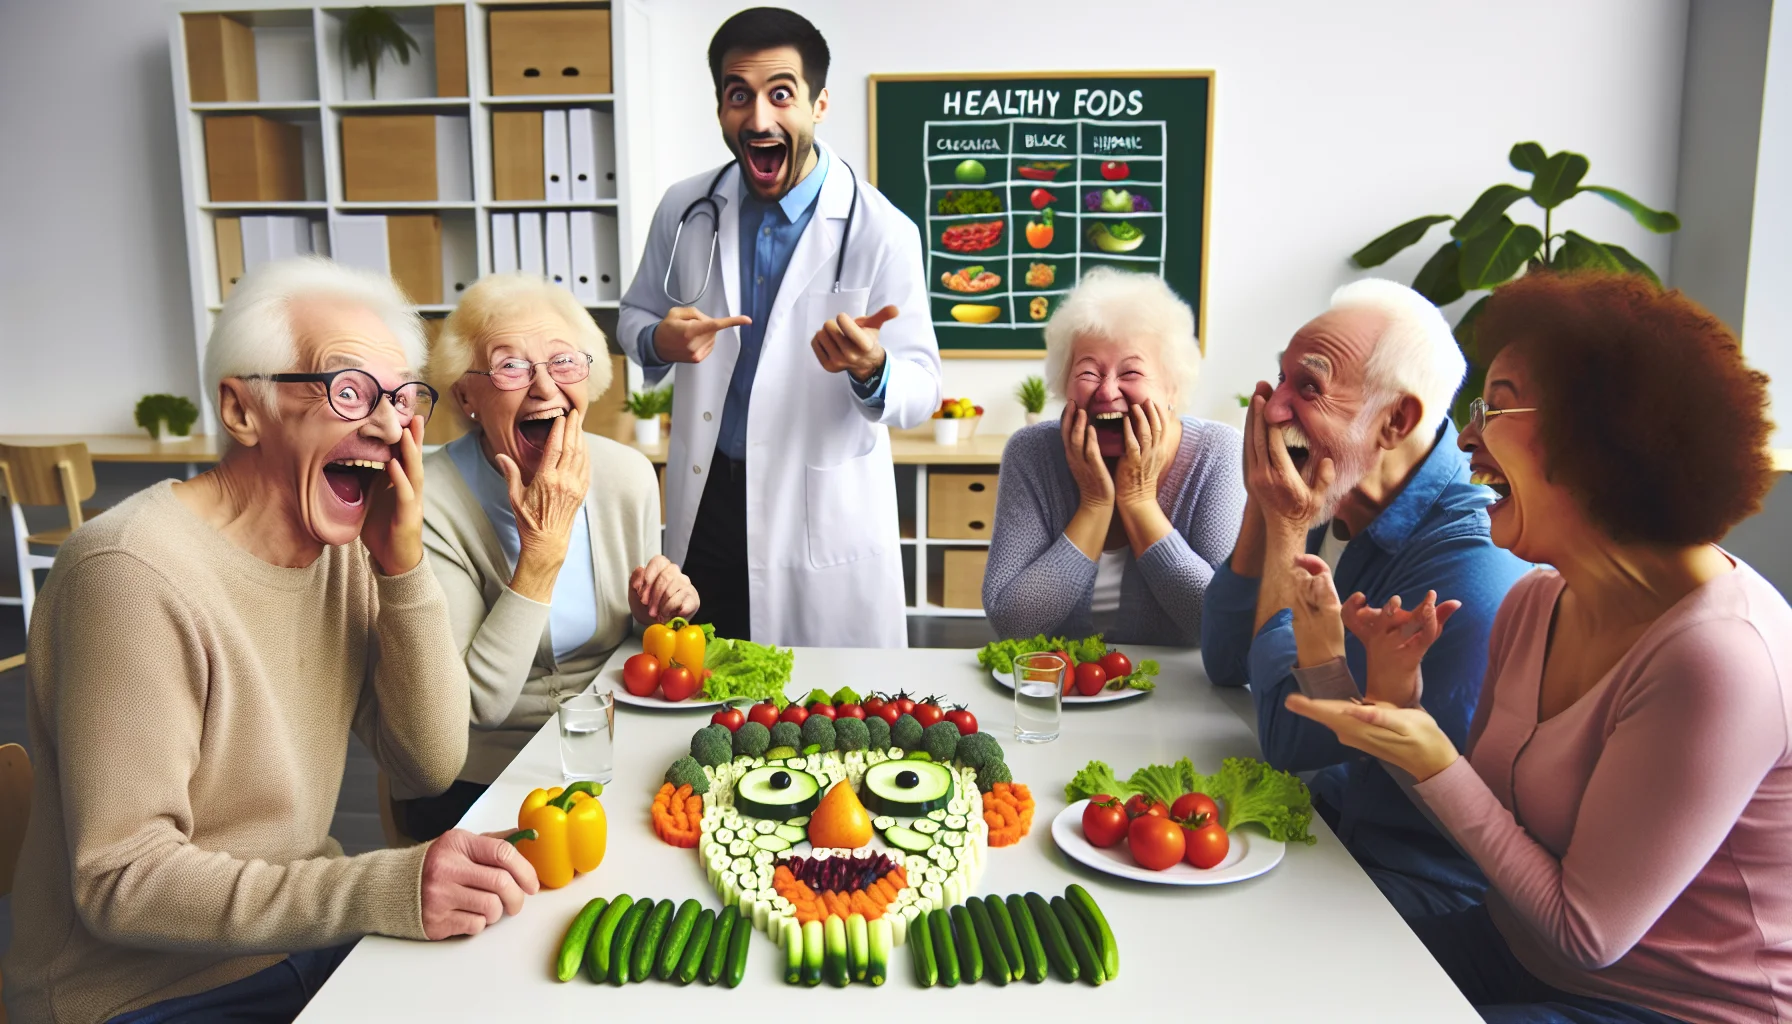 Create an amusing, realistic visual showing a group of seniors from diverse descents such as Caucasian, Black, Hispanic, and Asian attending a class at the 'Center for Healthy Aging'. The focus of the scene is them laughing at vegetables on their plates that have been arranged to look like their own faces, while an astonished dietitian points at a chart of healthy foods on the board. The atmosphere is joyful and lighthearted, and everyone seems to be genuinely enjoying this creative approach to healthy eating.